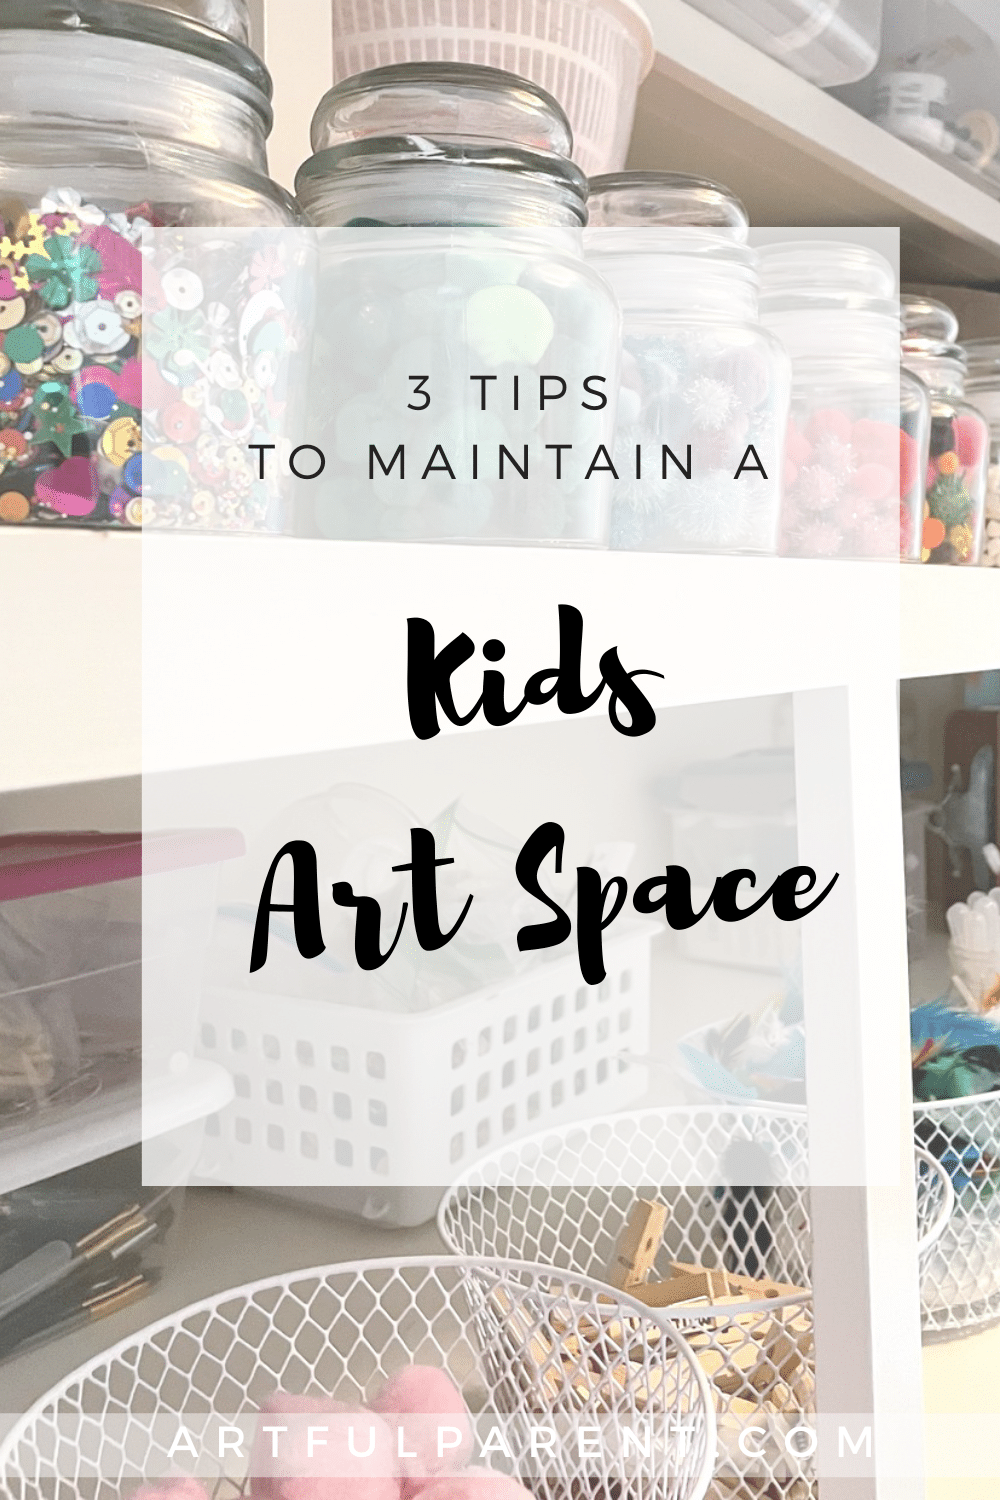 3 Tips to Maintain a Kids Art Space_Pinterest